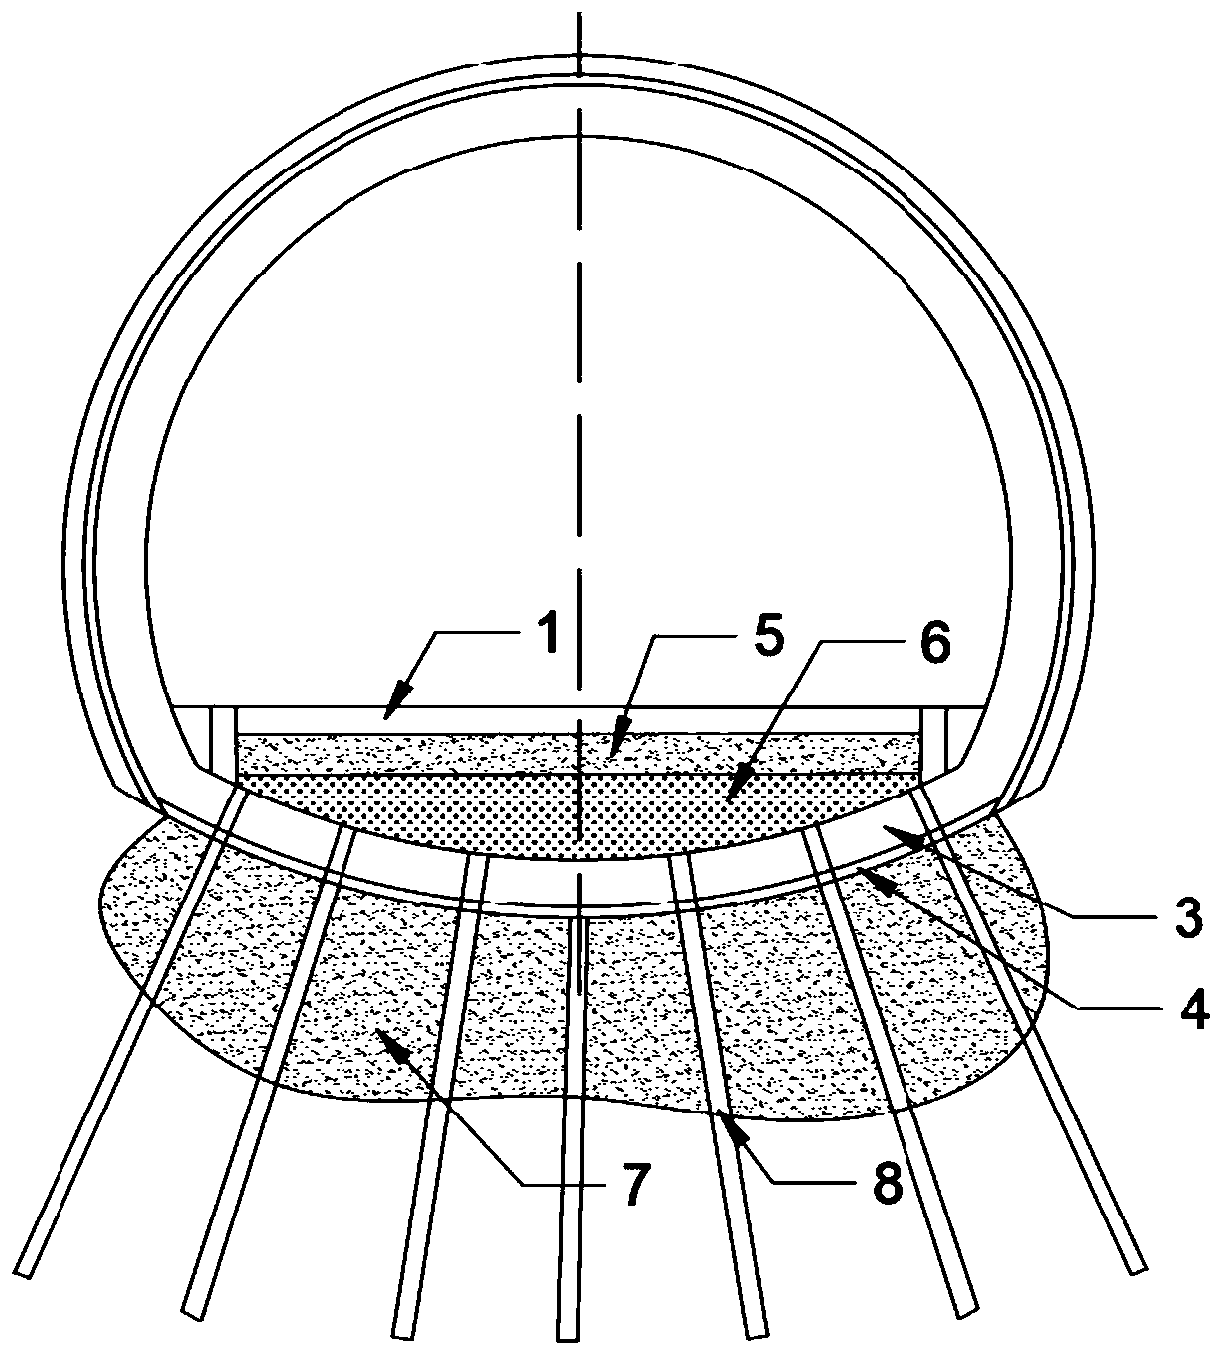 Tunnel inverted arch structure suitable for floor heave deformation control and method